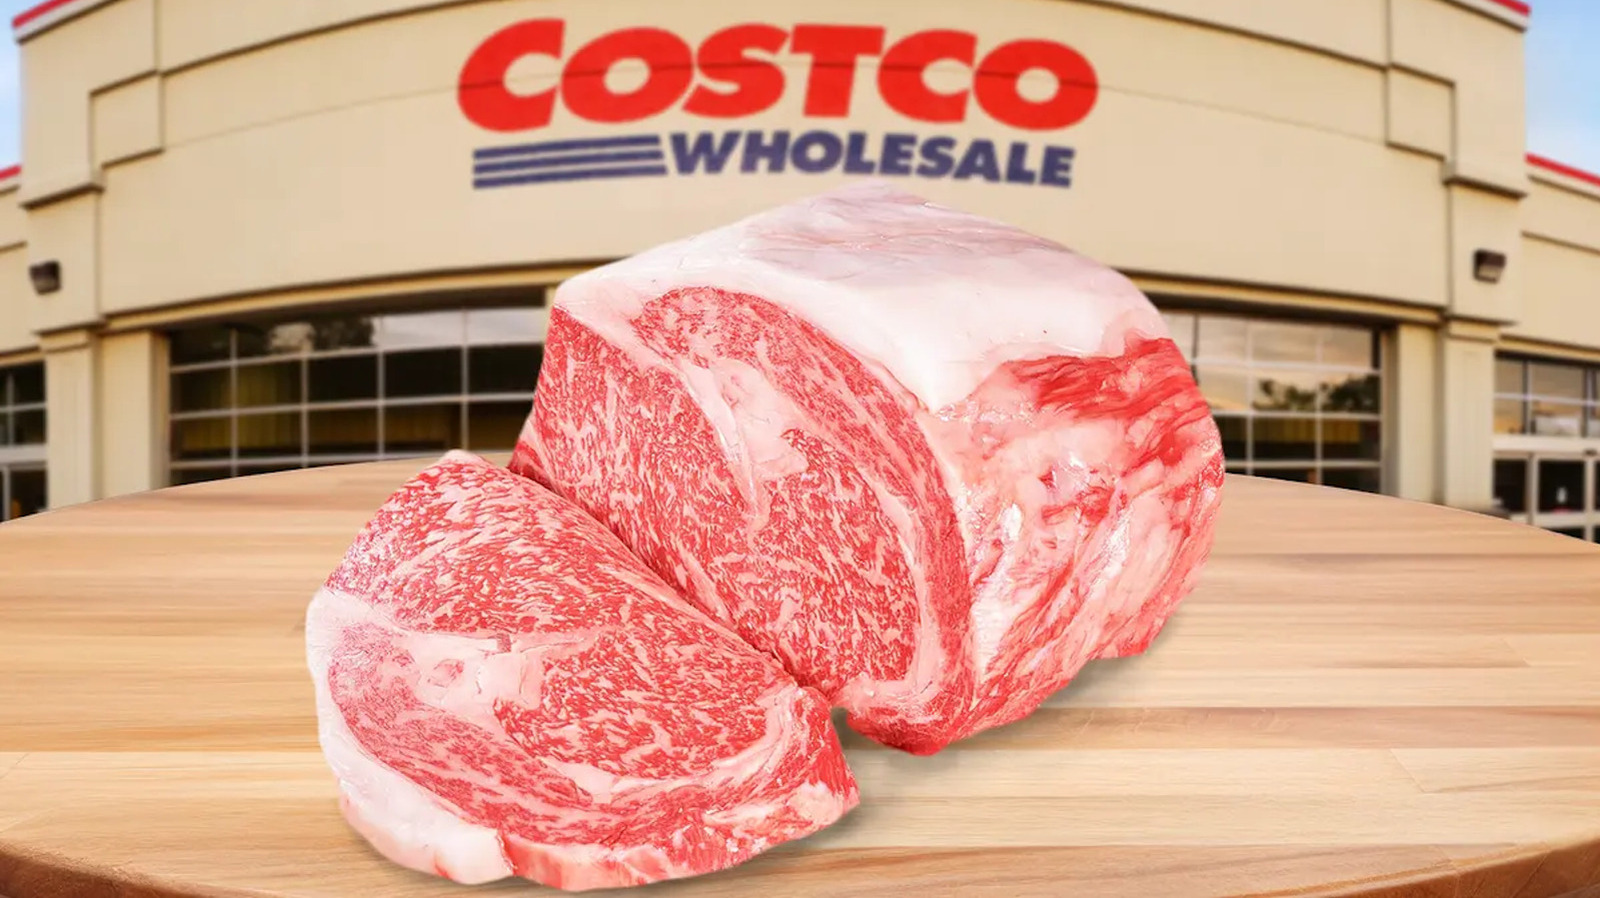 Costco’s most expensive steak is on sale for the holidays